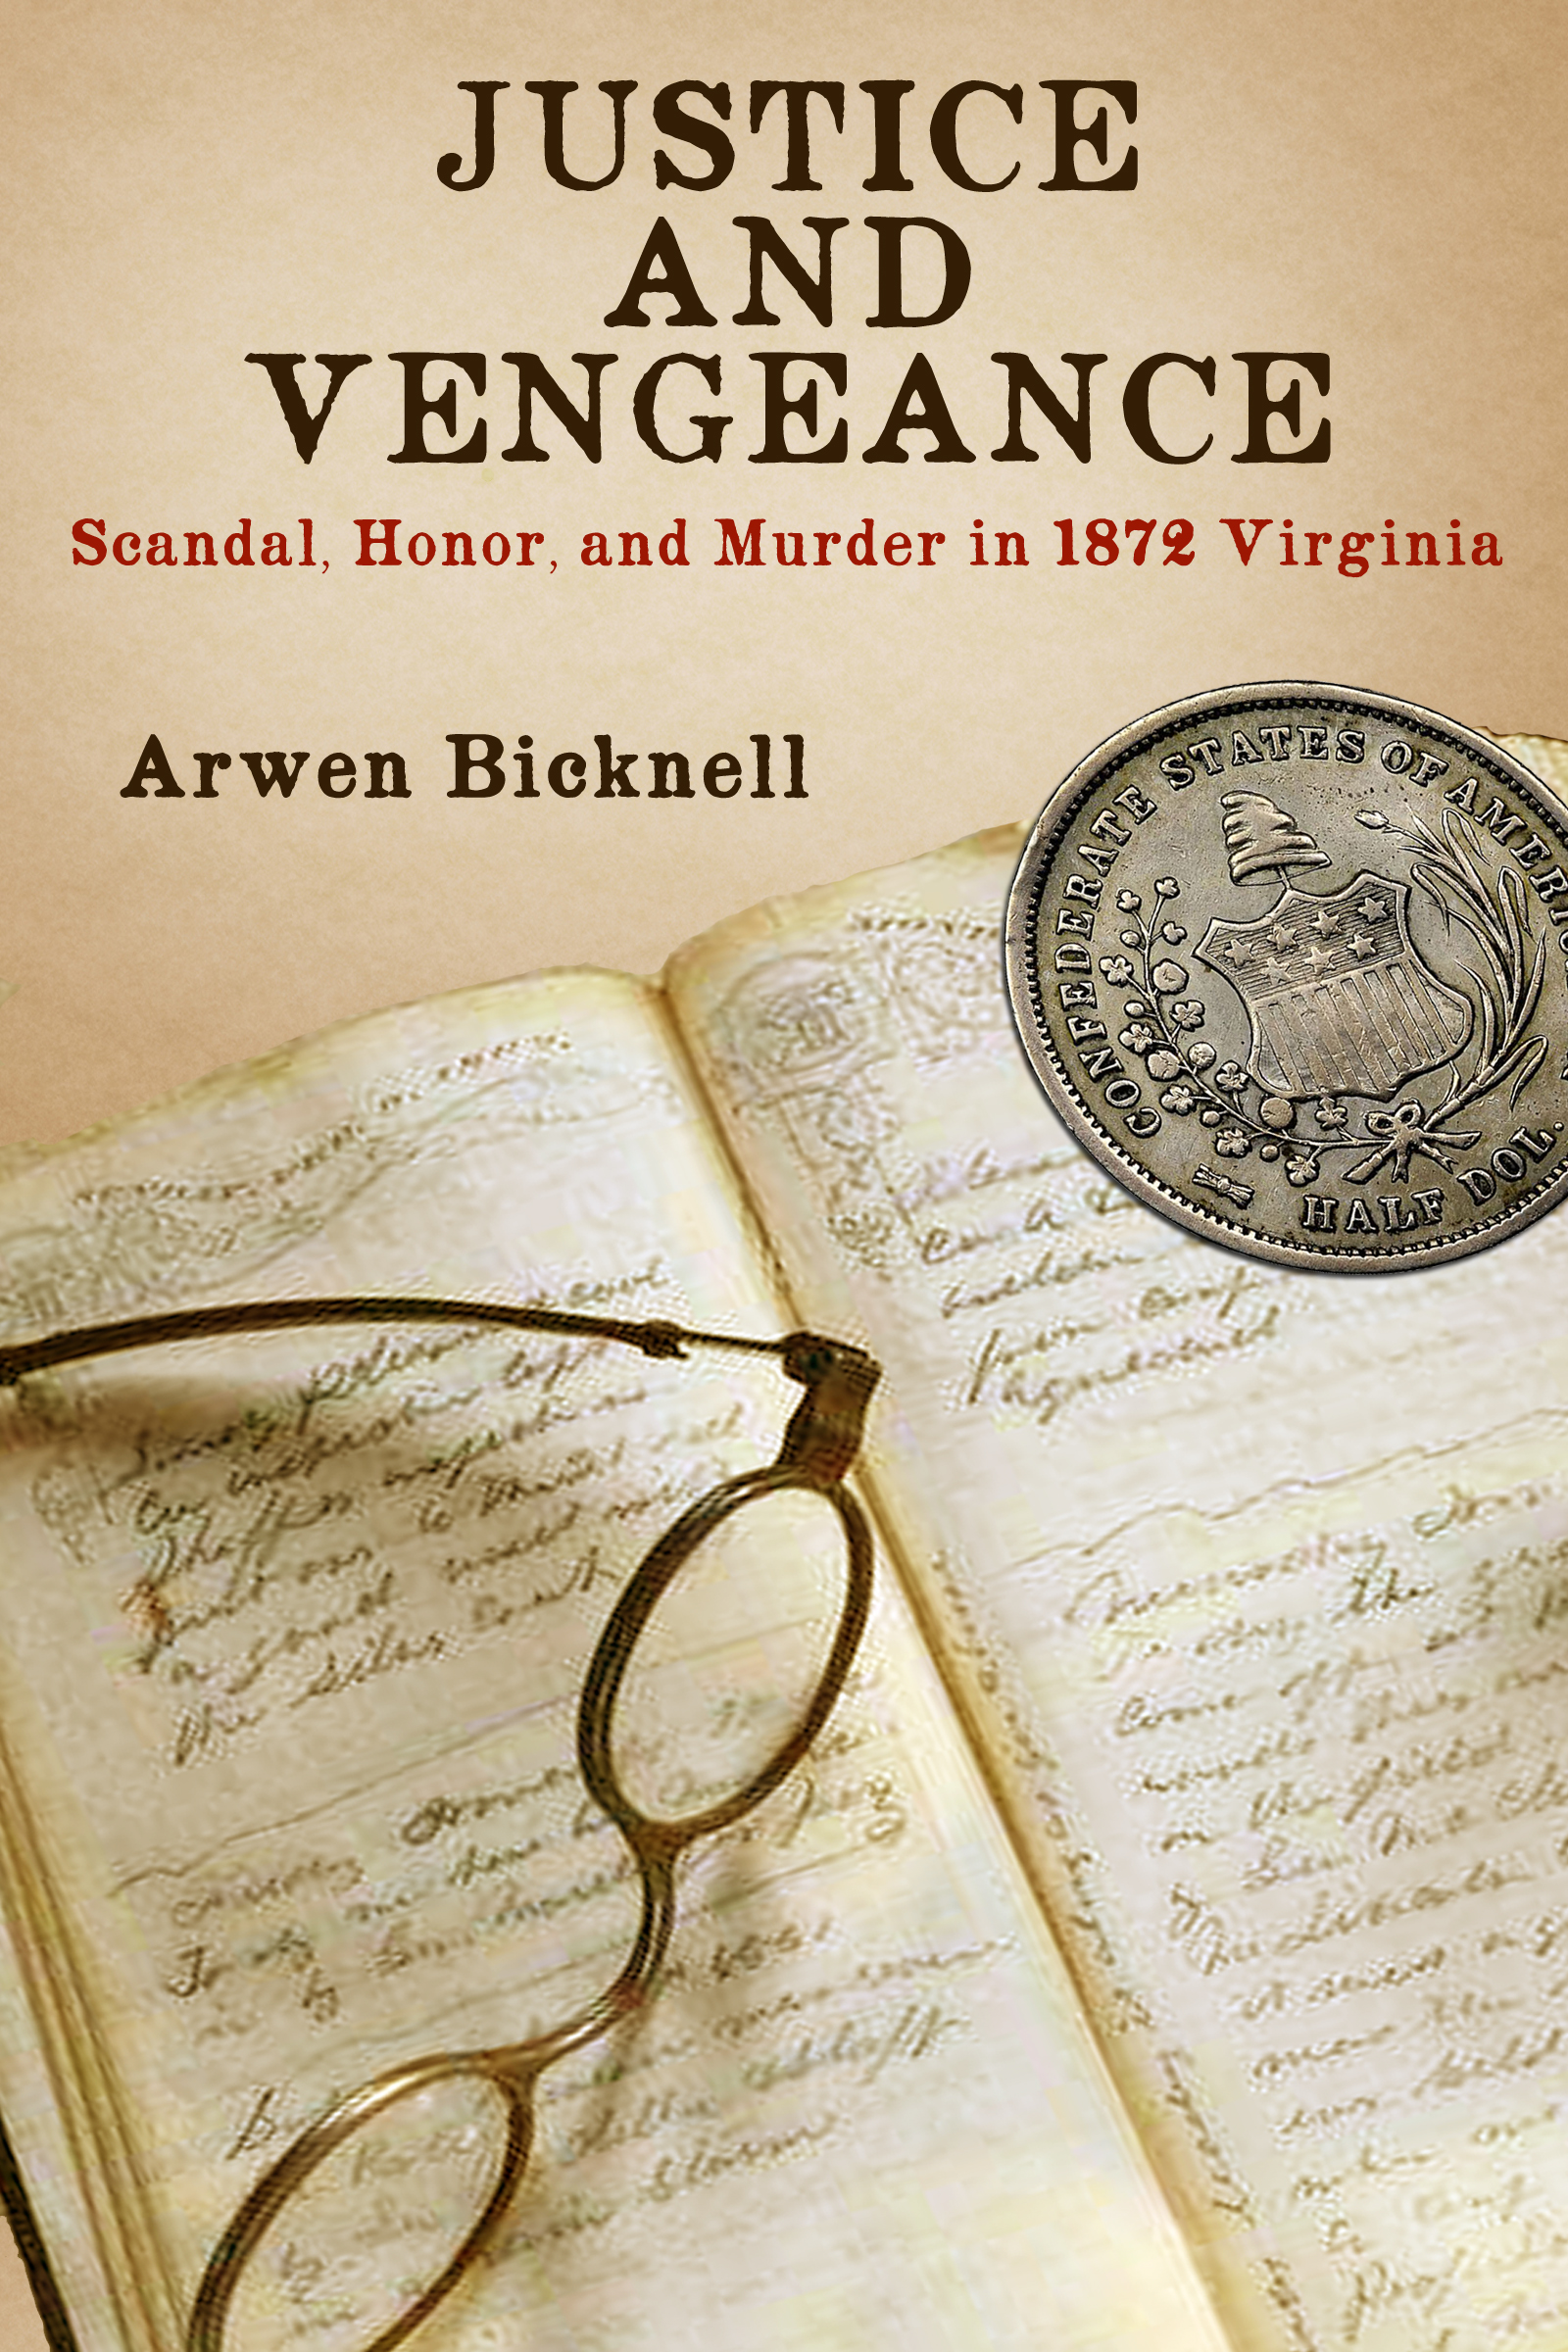 Justice and Vengeance by Arwen Bicknell